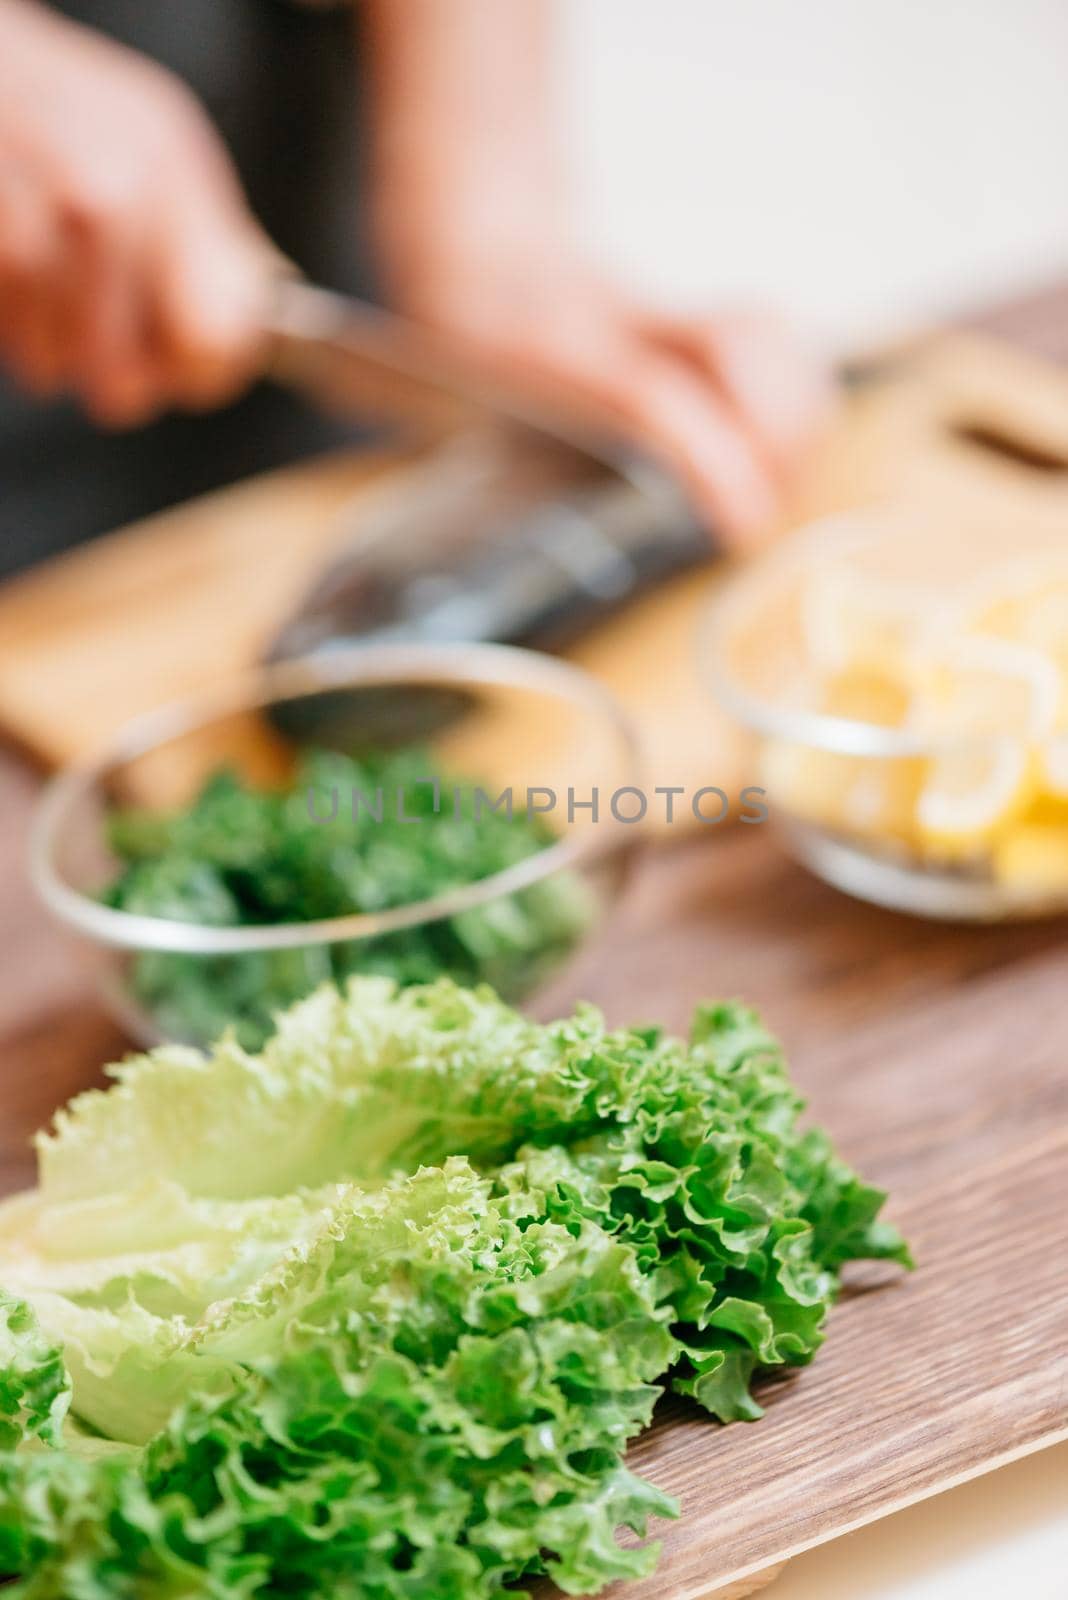 Unrecognizable woman cooking in the kitchen. Focus on foreground.